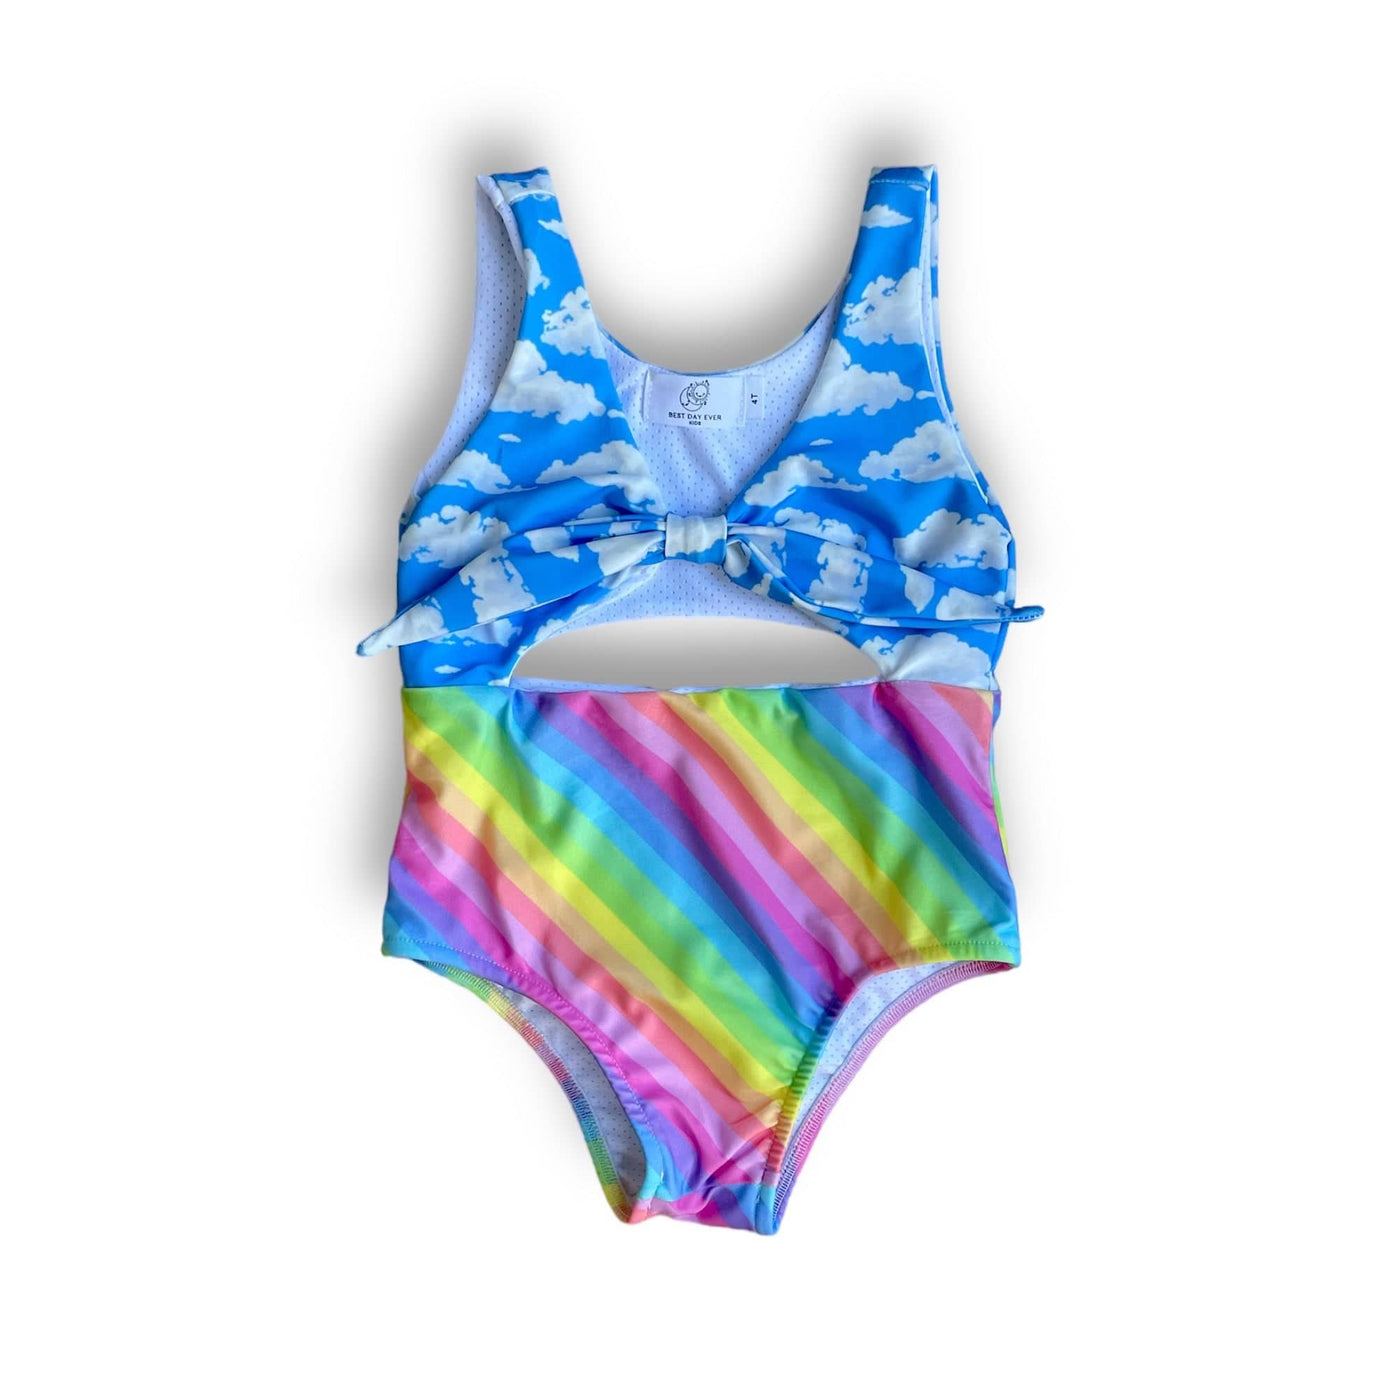 Best Day Ever Kids Swimsuit Perfect Day Swimsuit buy online boutique kids clothing